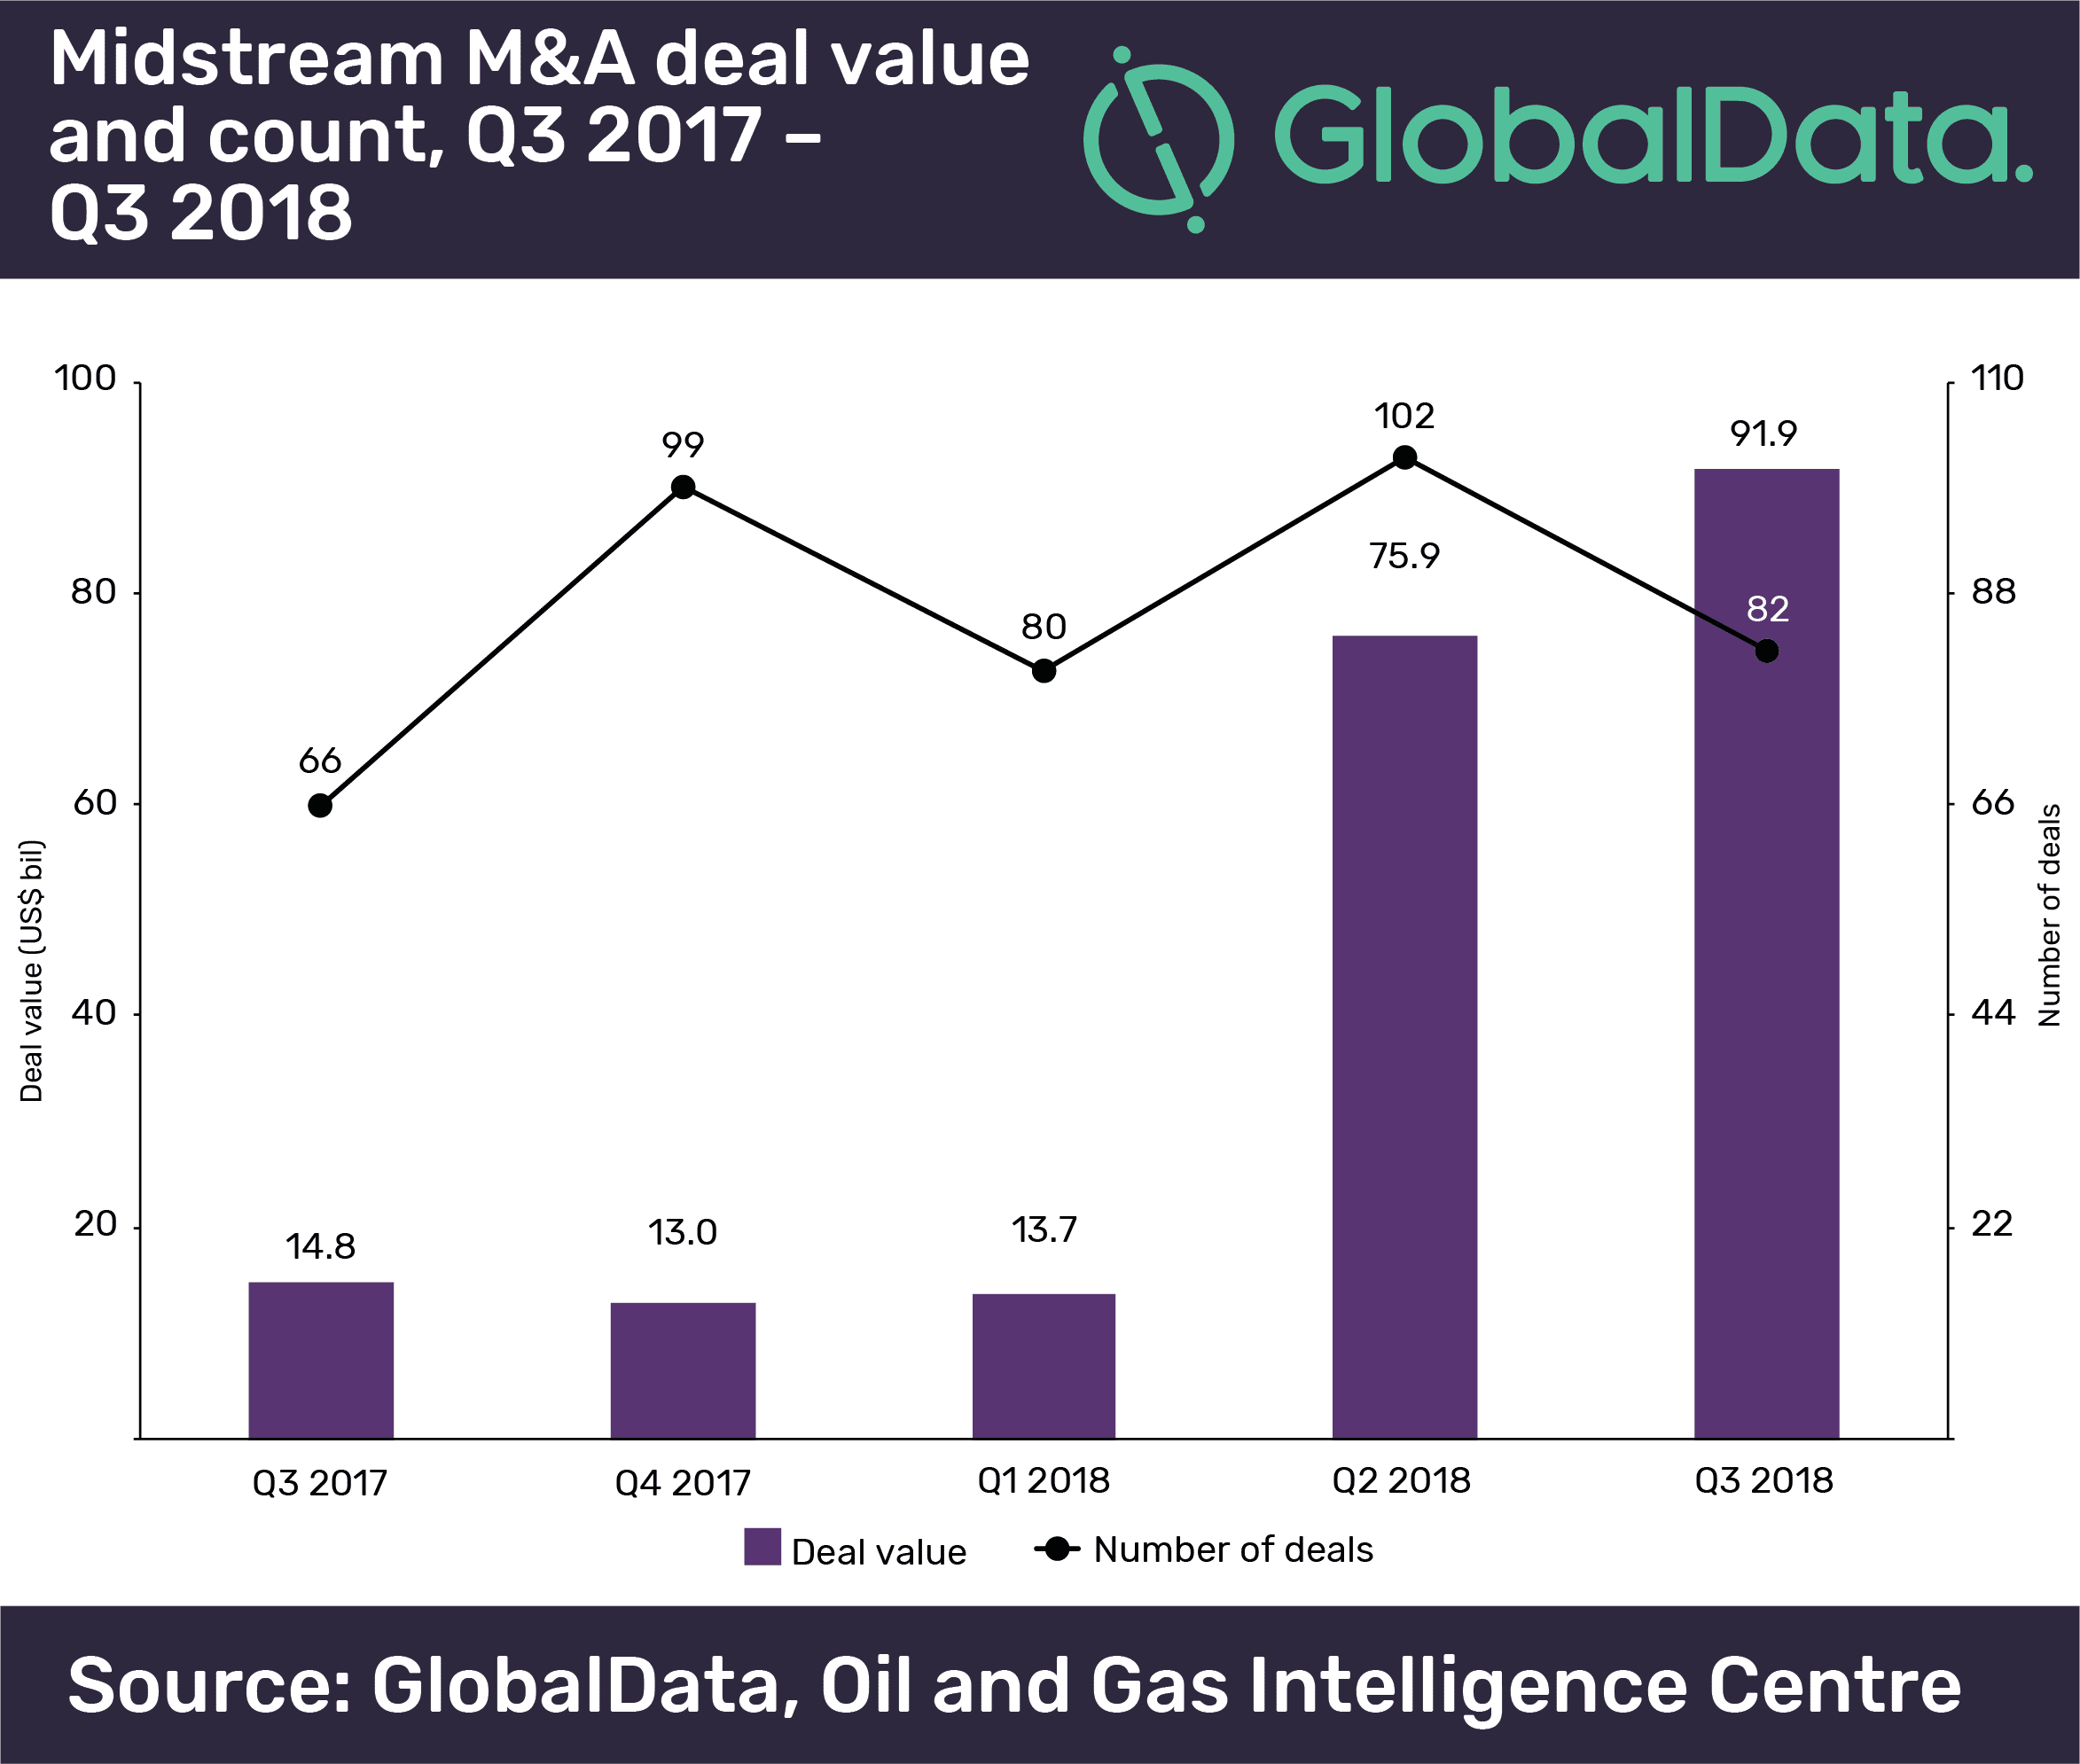 M&A Values Totaled $91.9 Billion in the Midstream Sector in Q3 2018